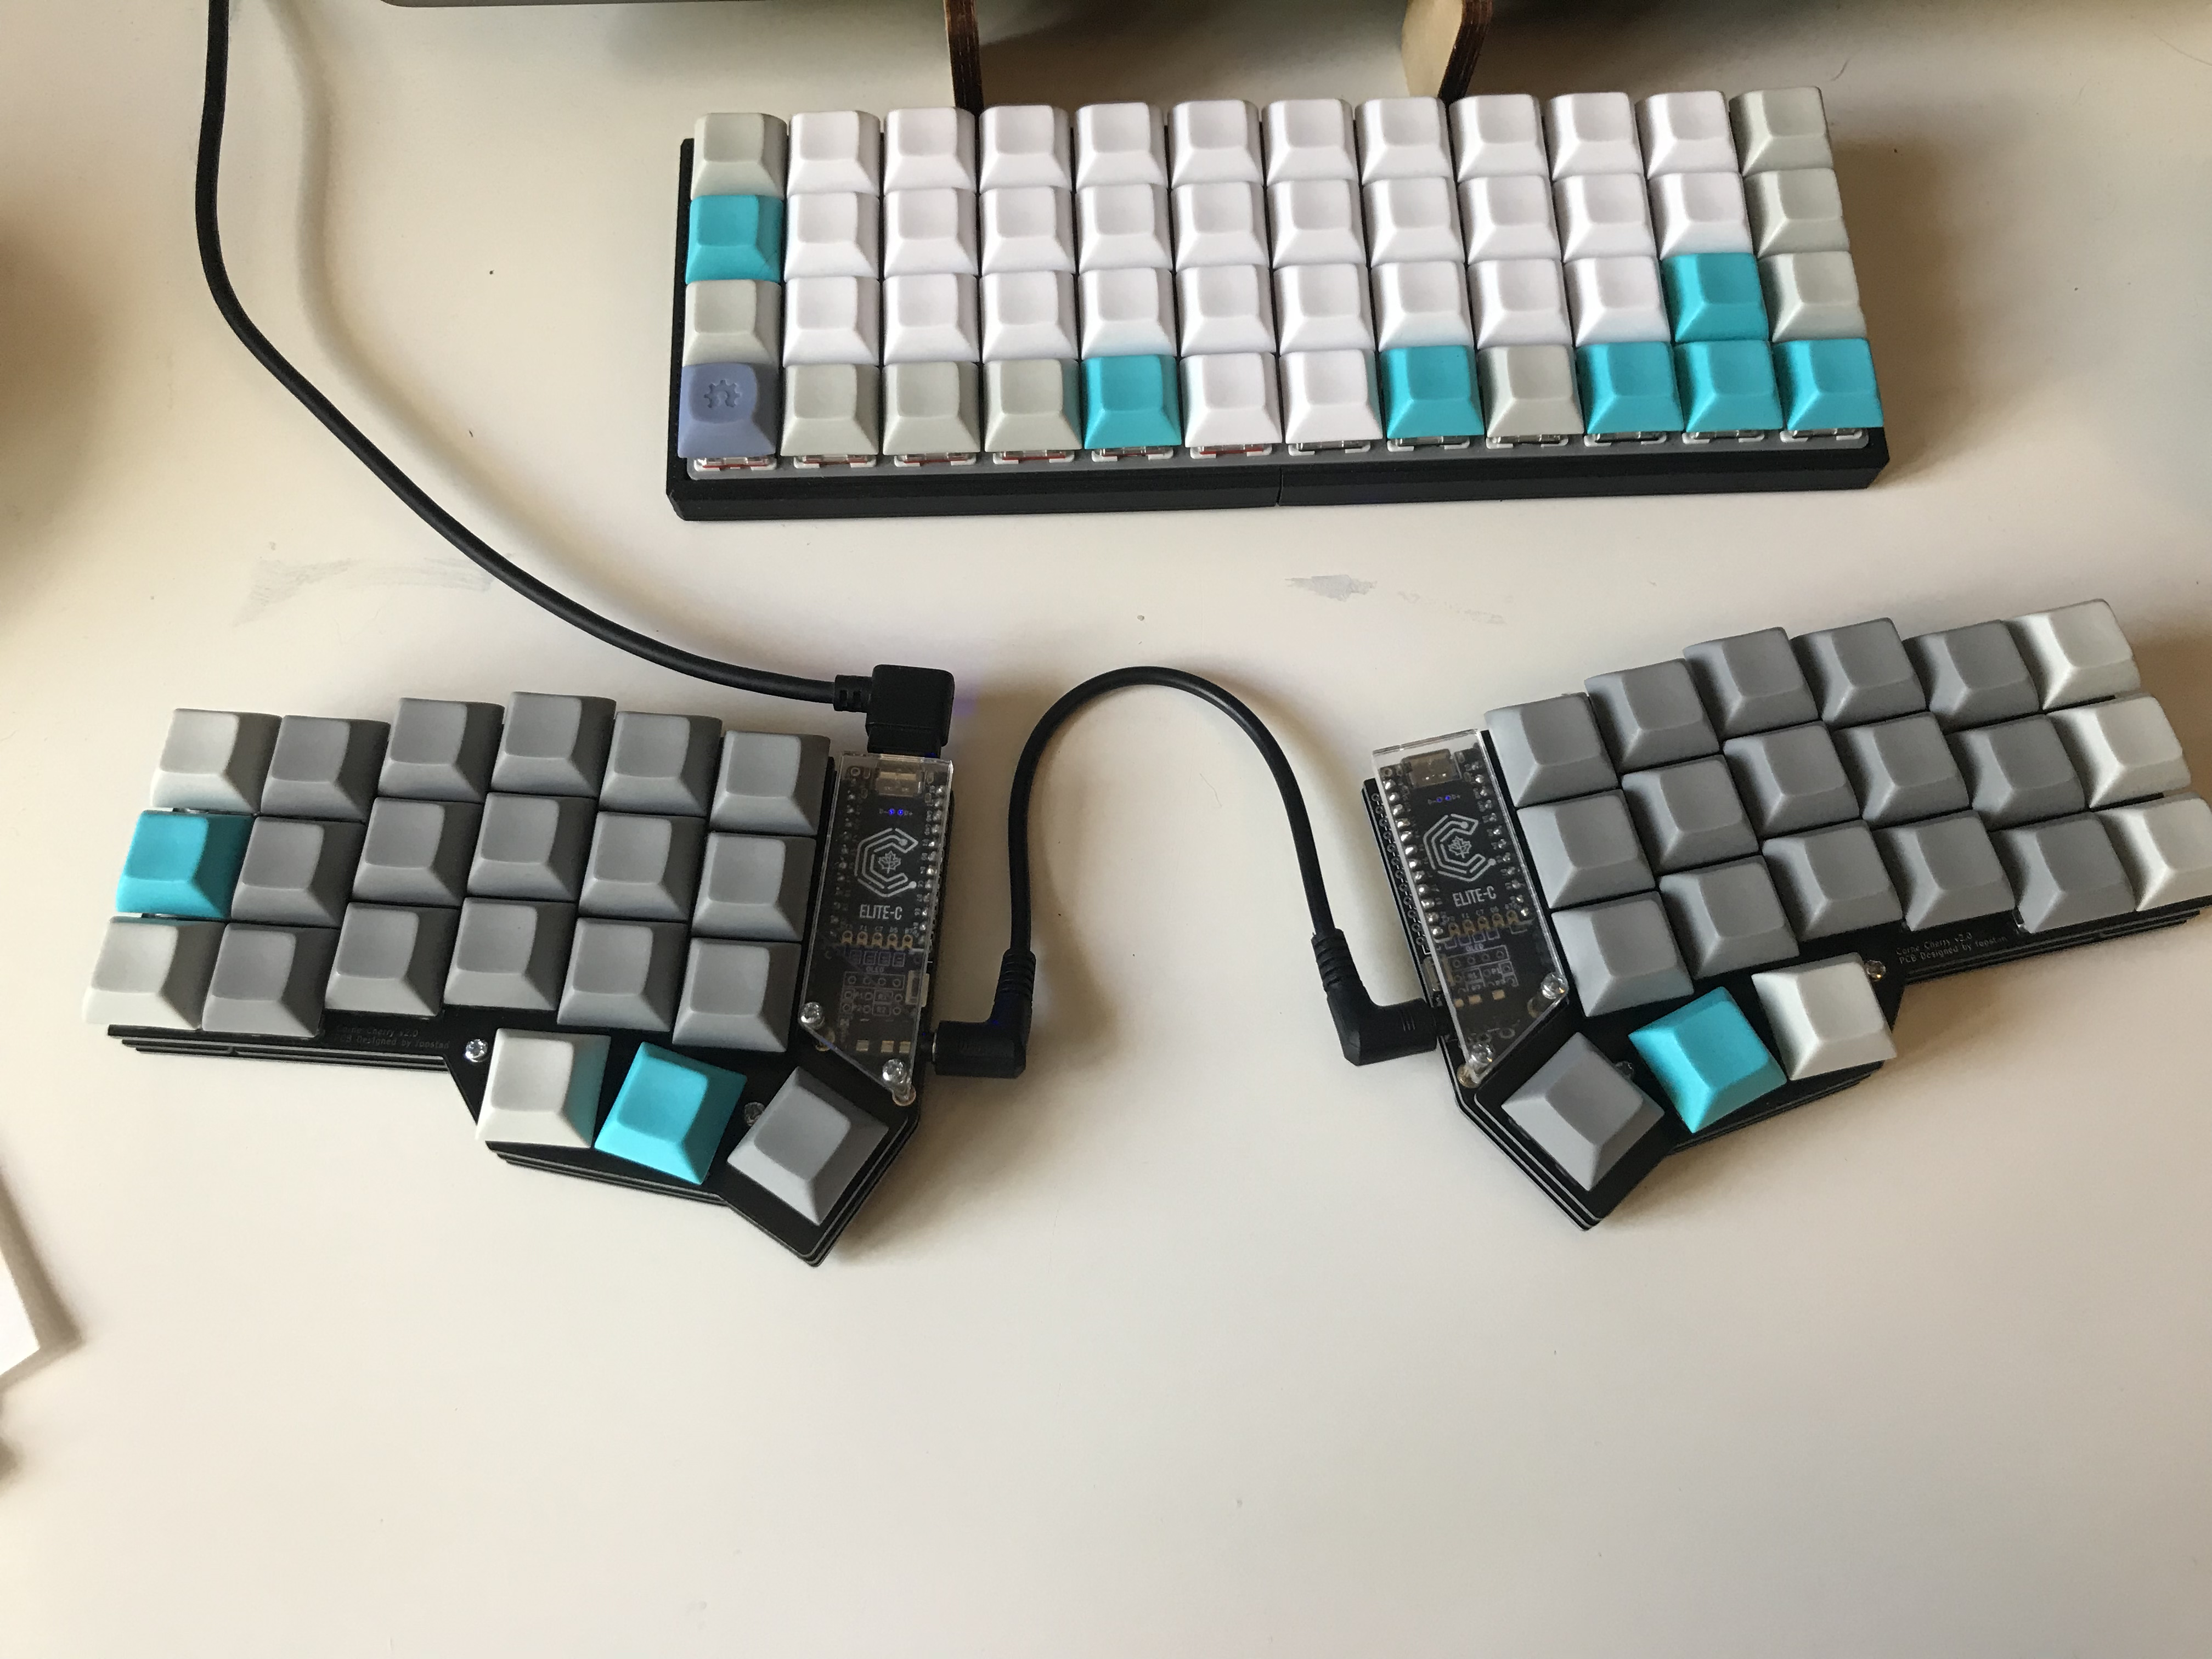 Both of my two DIY keyboards together